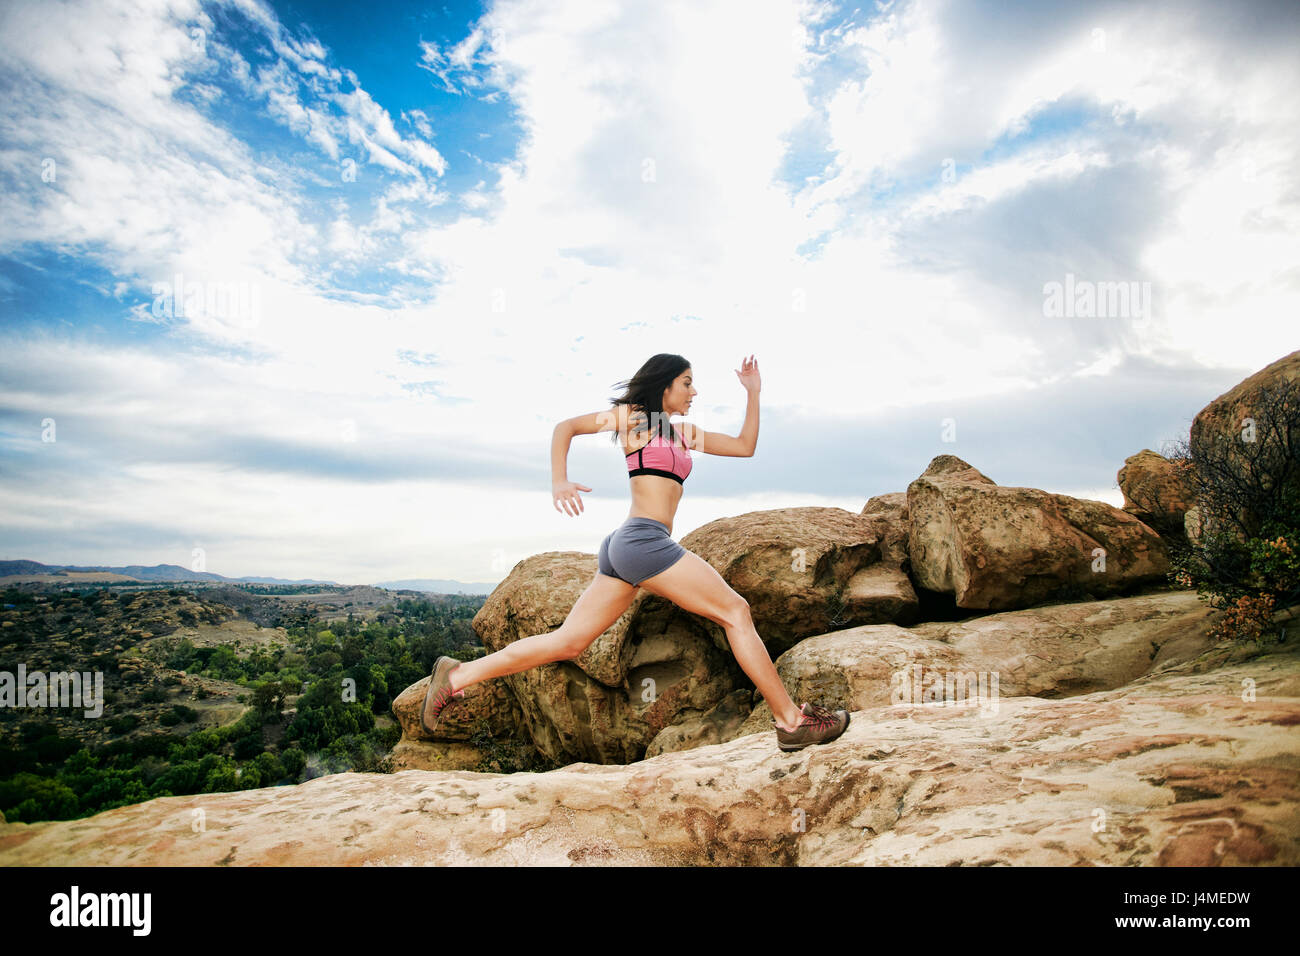 Hispanic woman running on rock formation Banque D'Images